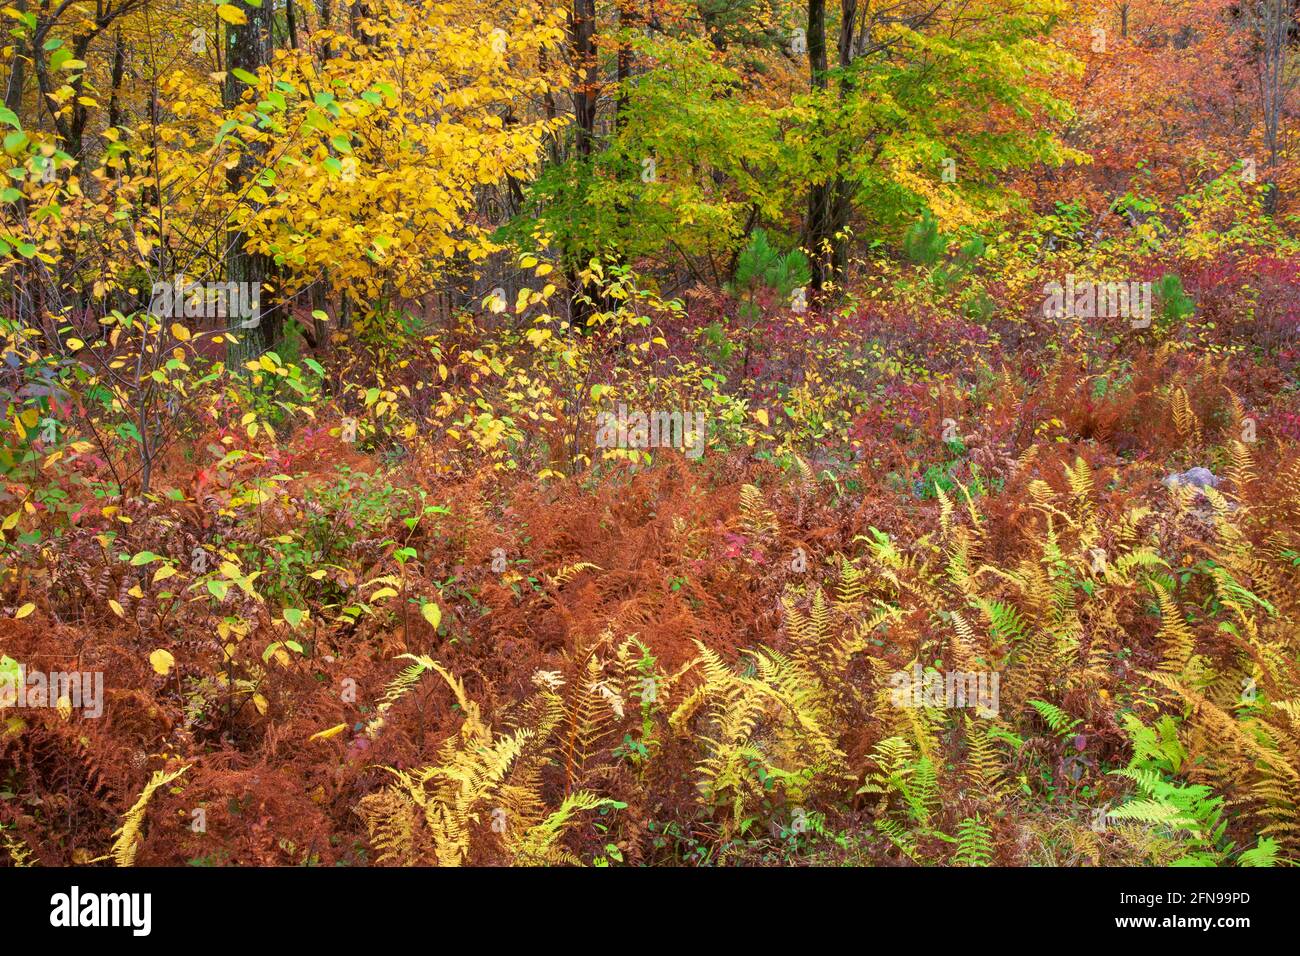 A second grouth hardwood forest in autumn in the Delaware State Forest, Pocono Mountains, Pennsylvania Stock Photo